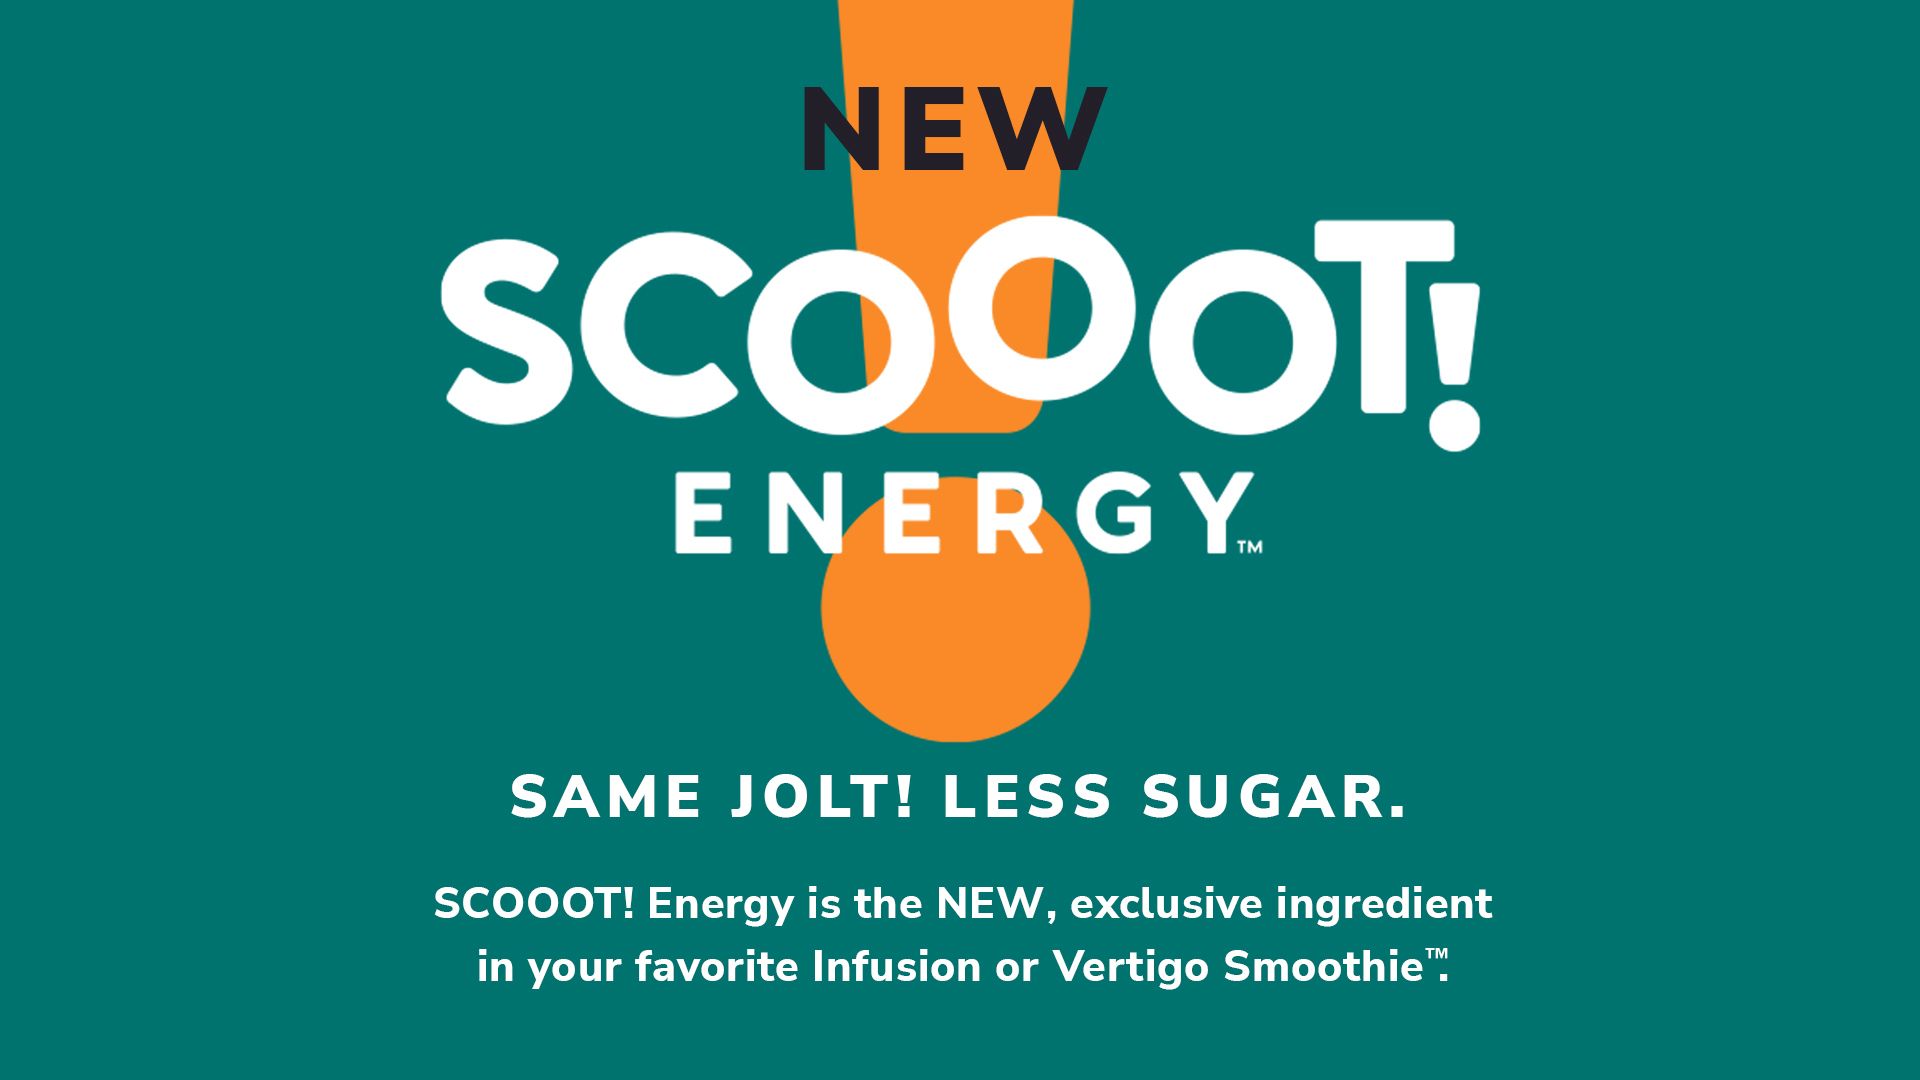 Scooter's Scooot Energy